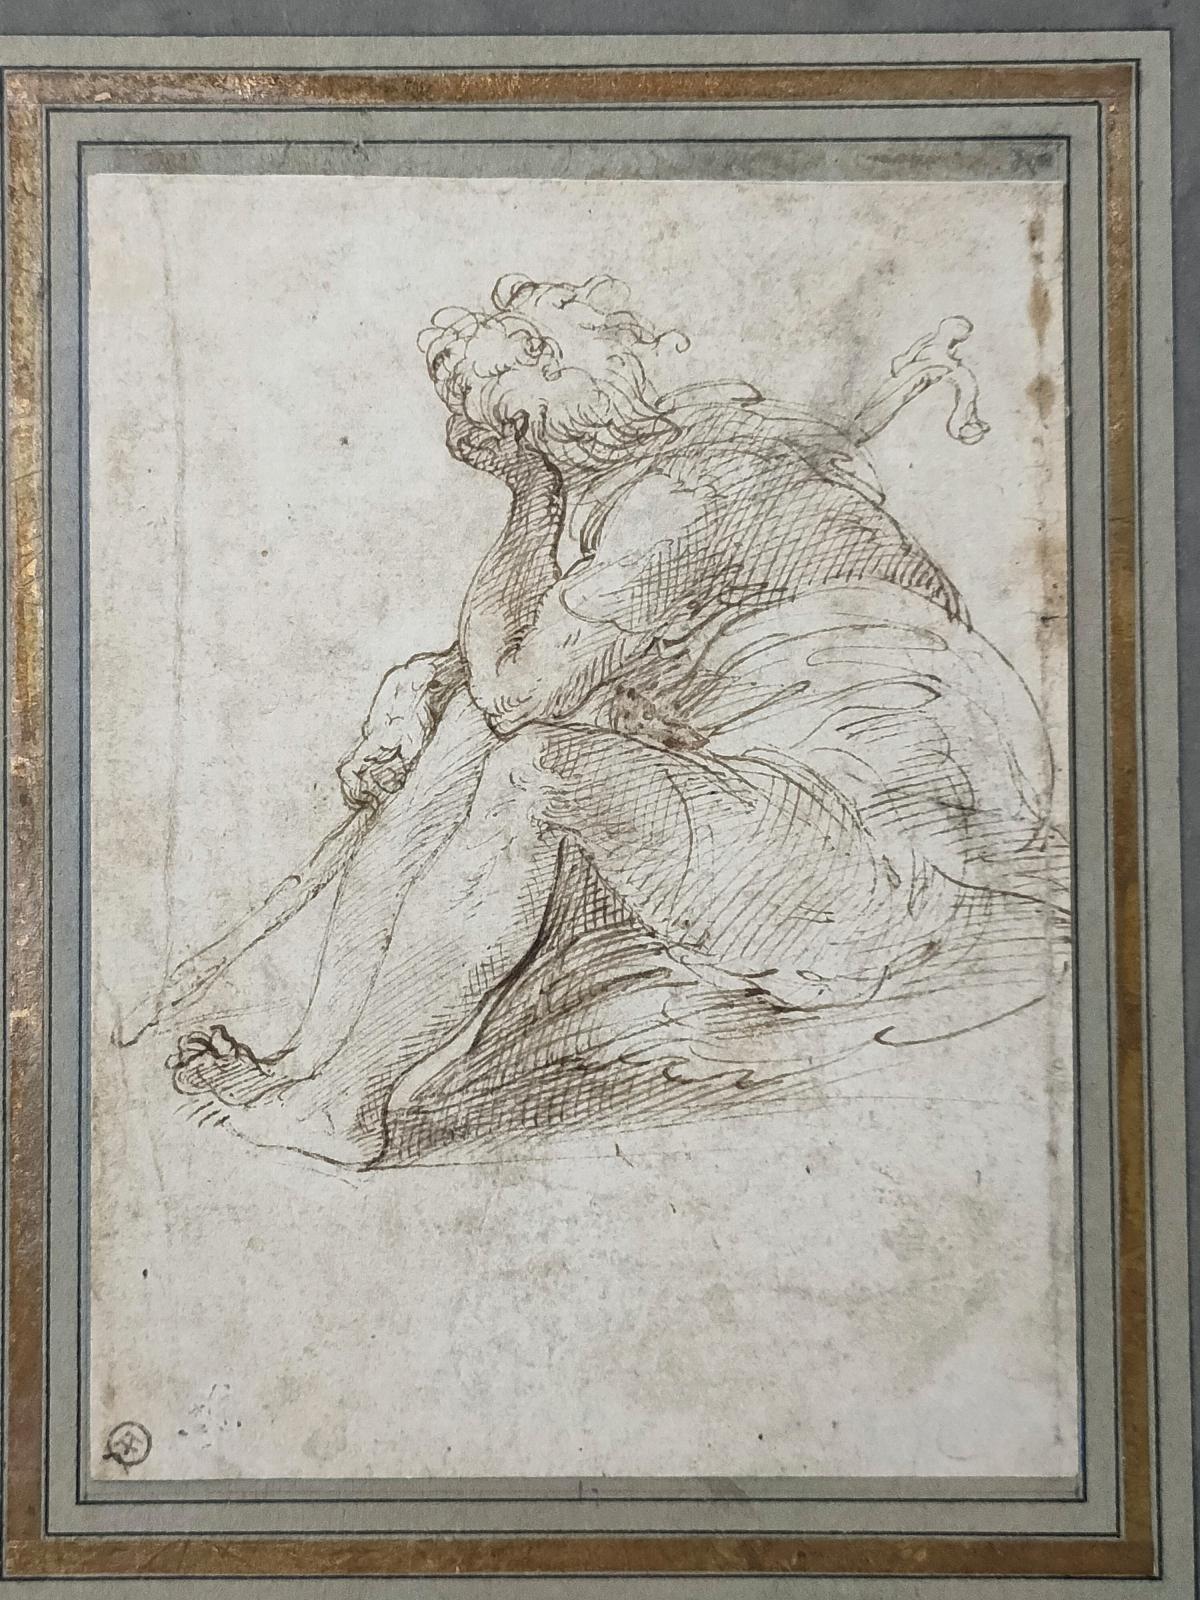 A Drawing Newly Attributed to Parmigianino